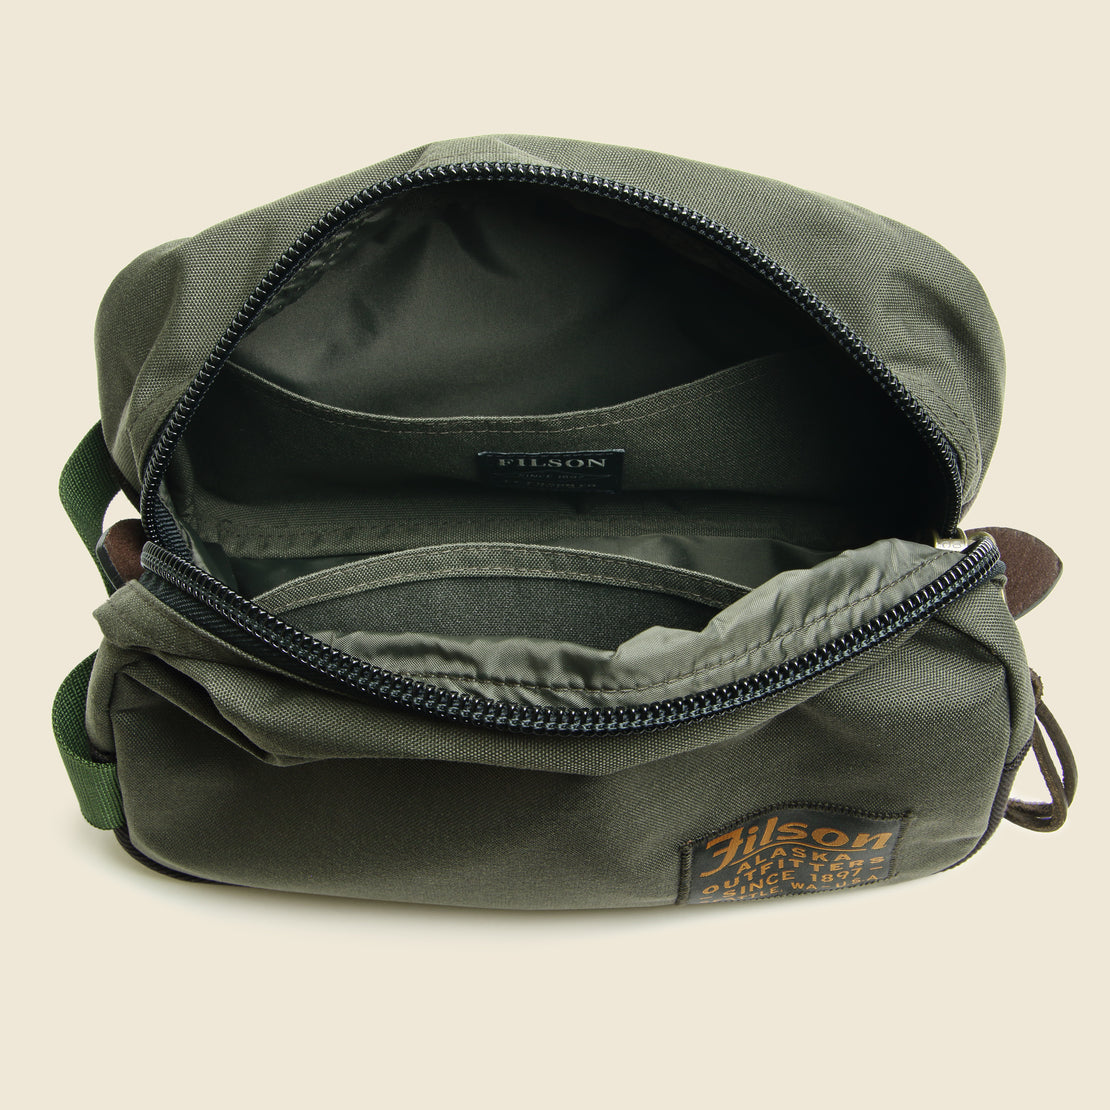 Travel Pack - Otter Green - Filson - STAG Provisions - Accessories - Bags / Luggage